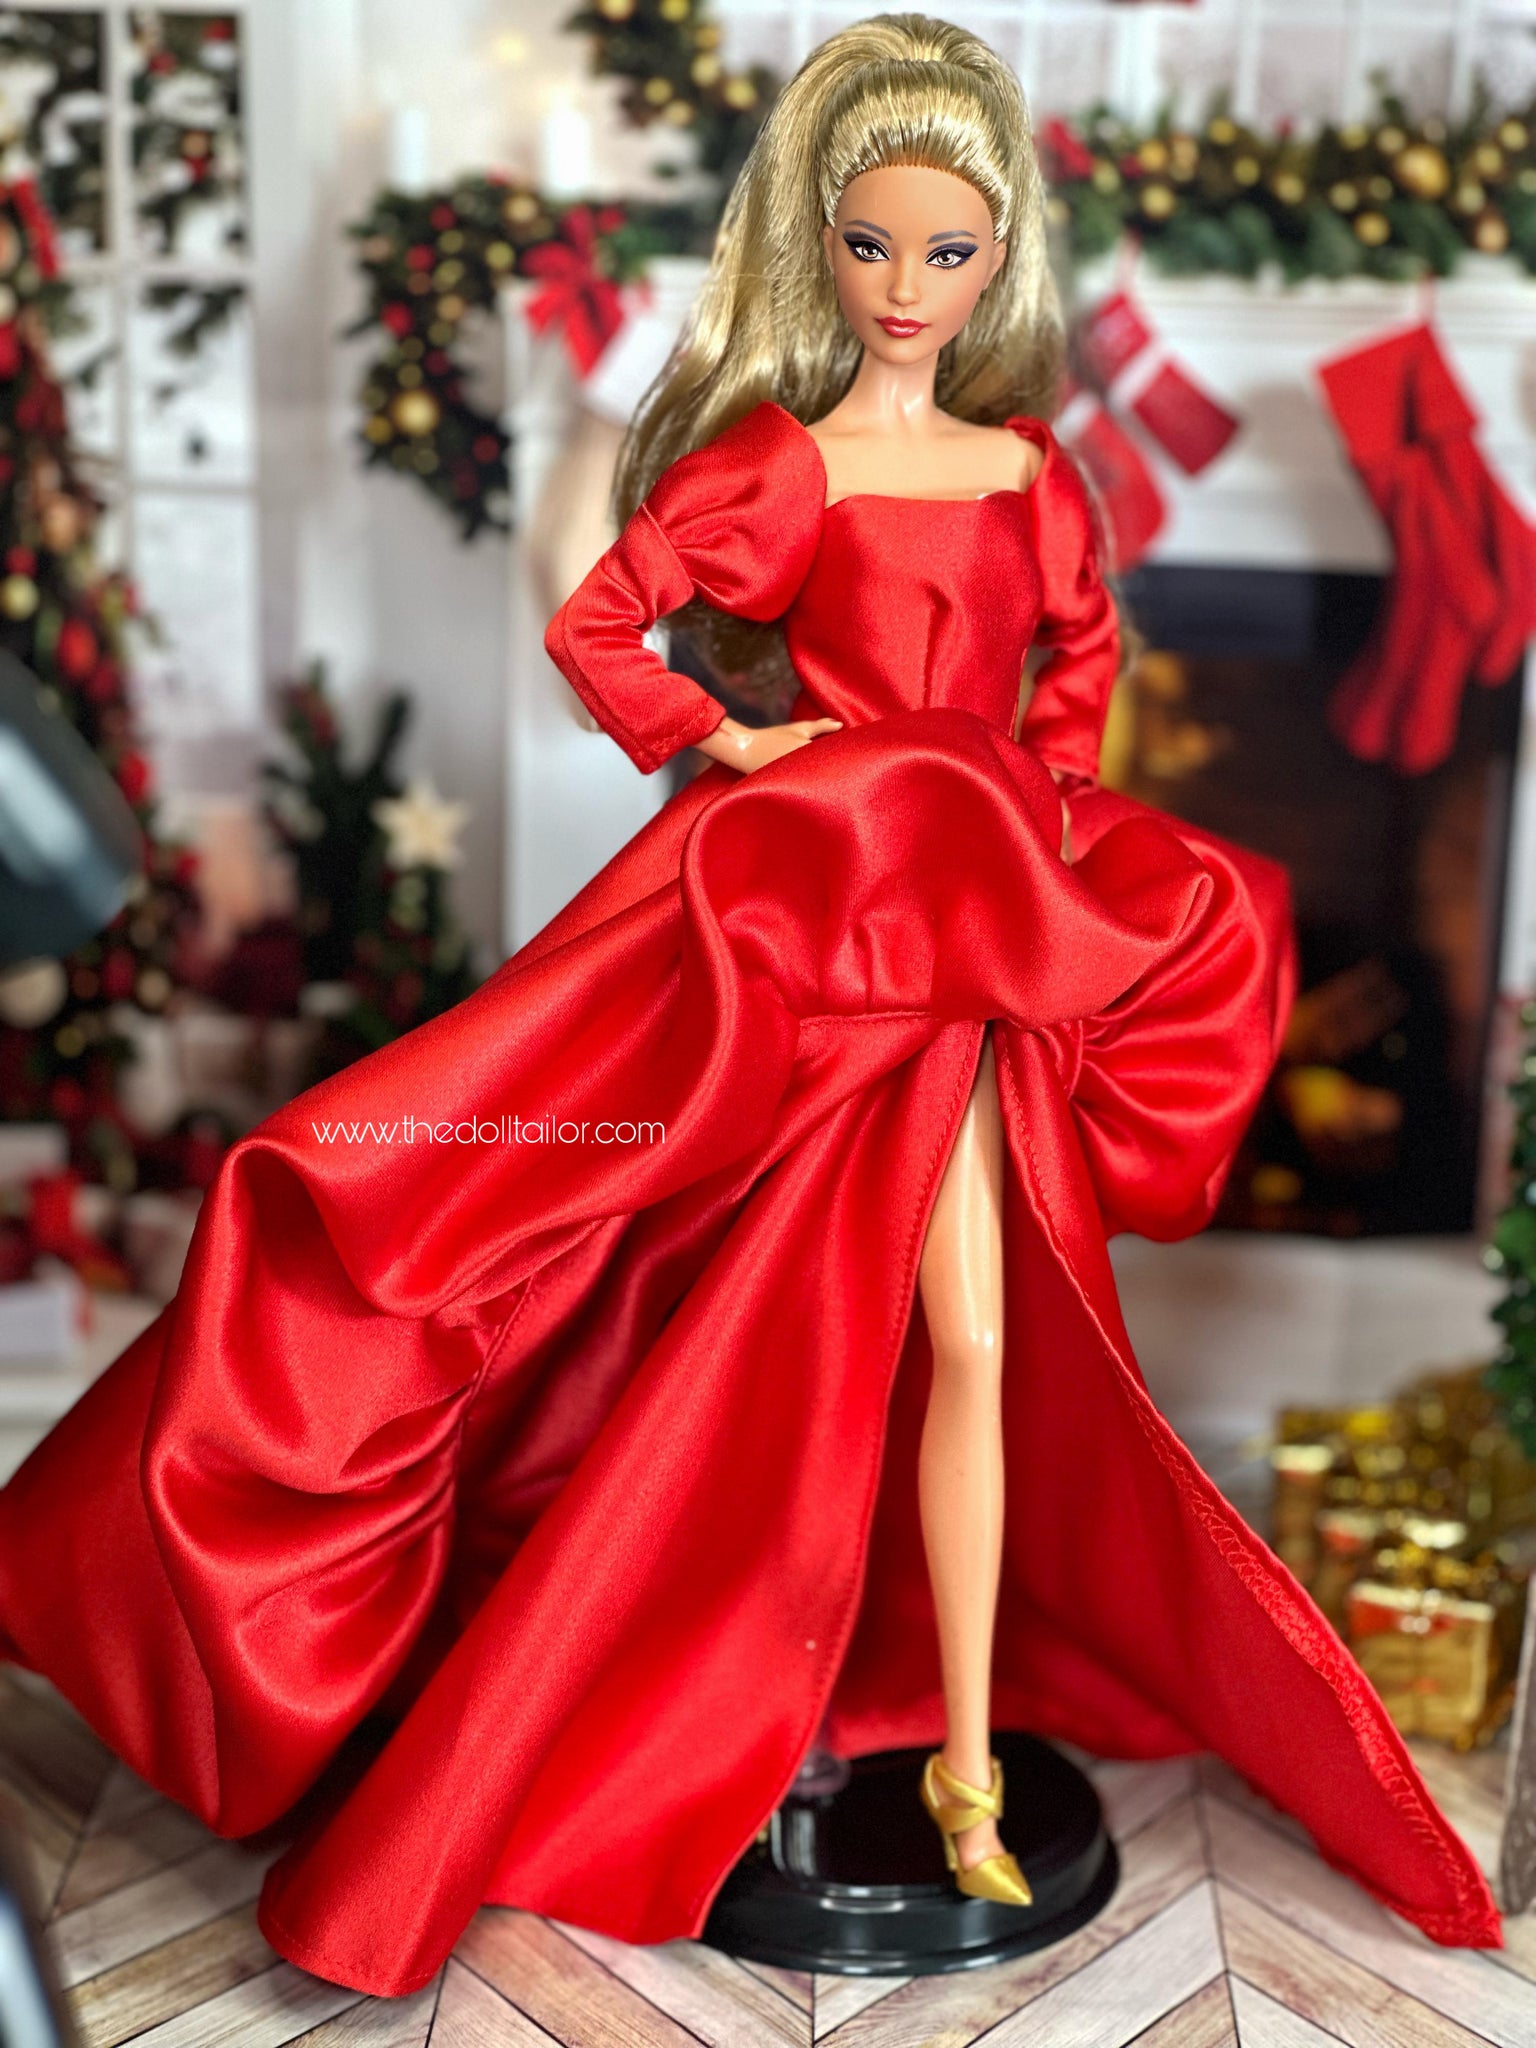 Doll Clothes Superstore  Buy Custom Barbie Doll Clothes Online